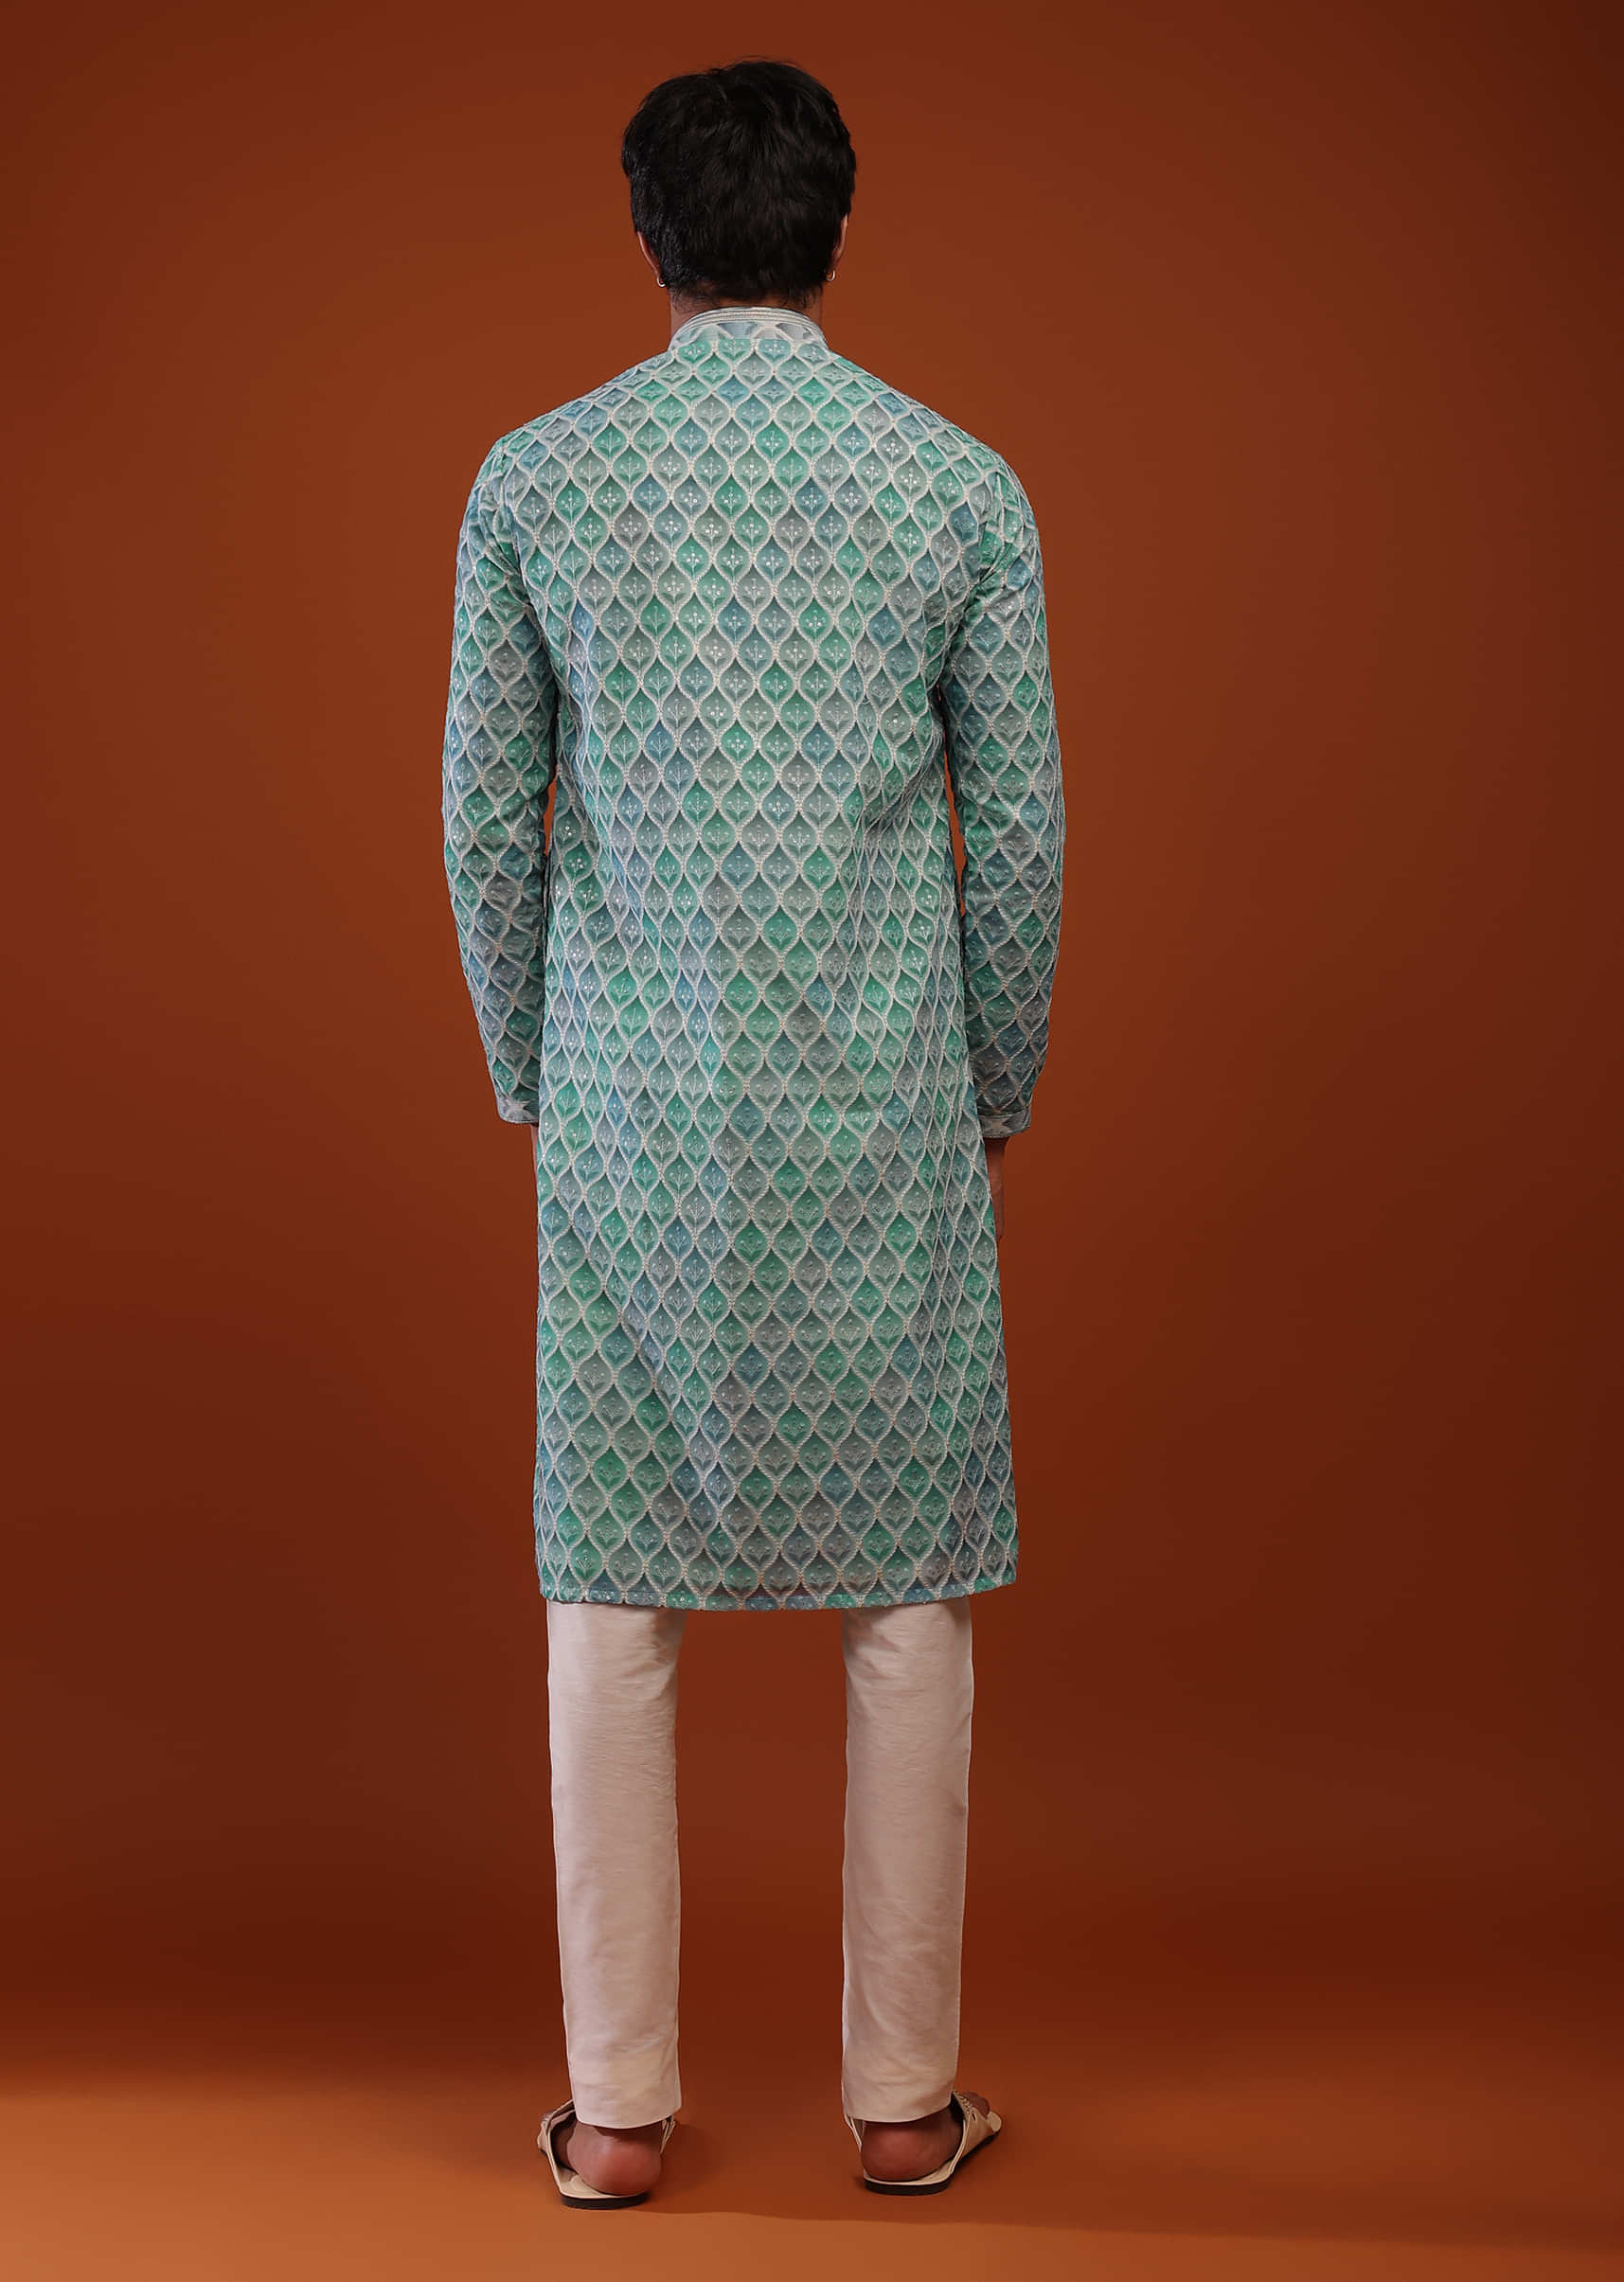 Teal Blue Shadded Block Printed Georgette Kurta With Lucknowi Thread Work, Moroccan Jaal And Floral Buttis